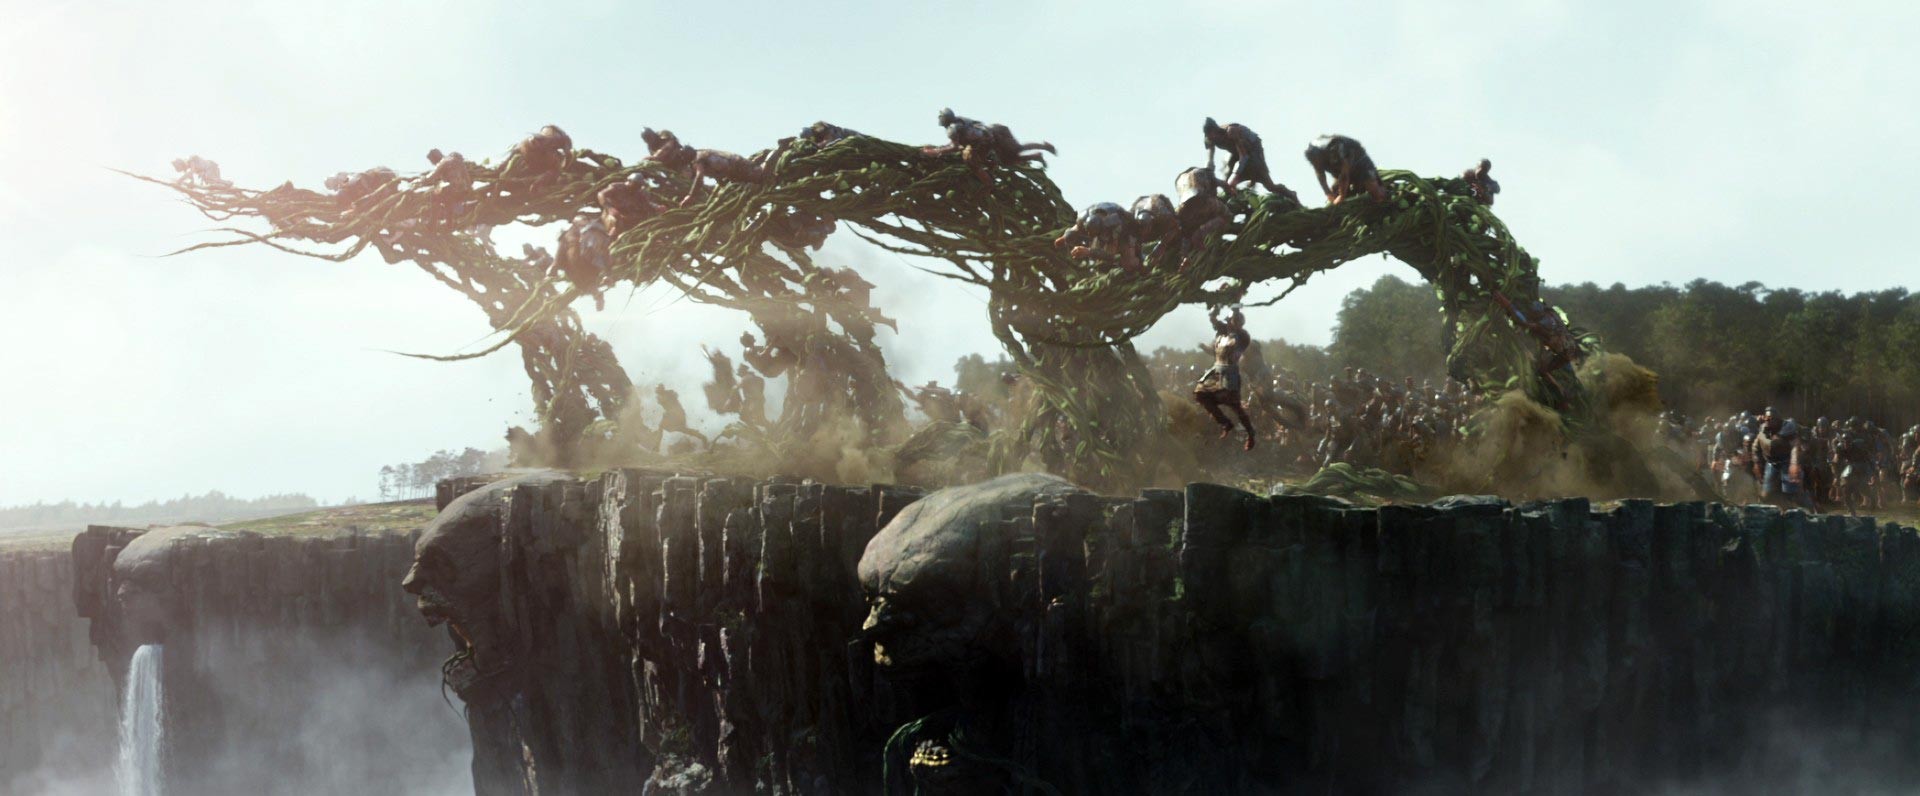 A scene from Warner Bros. Pictures' Jack the Giant Slayer (2013)